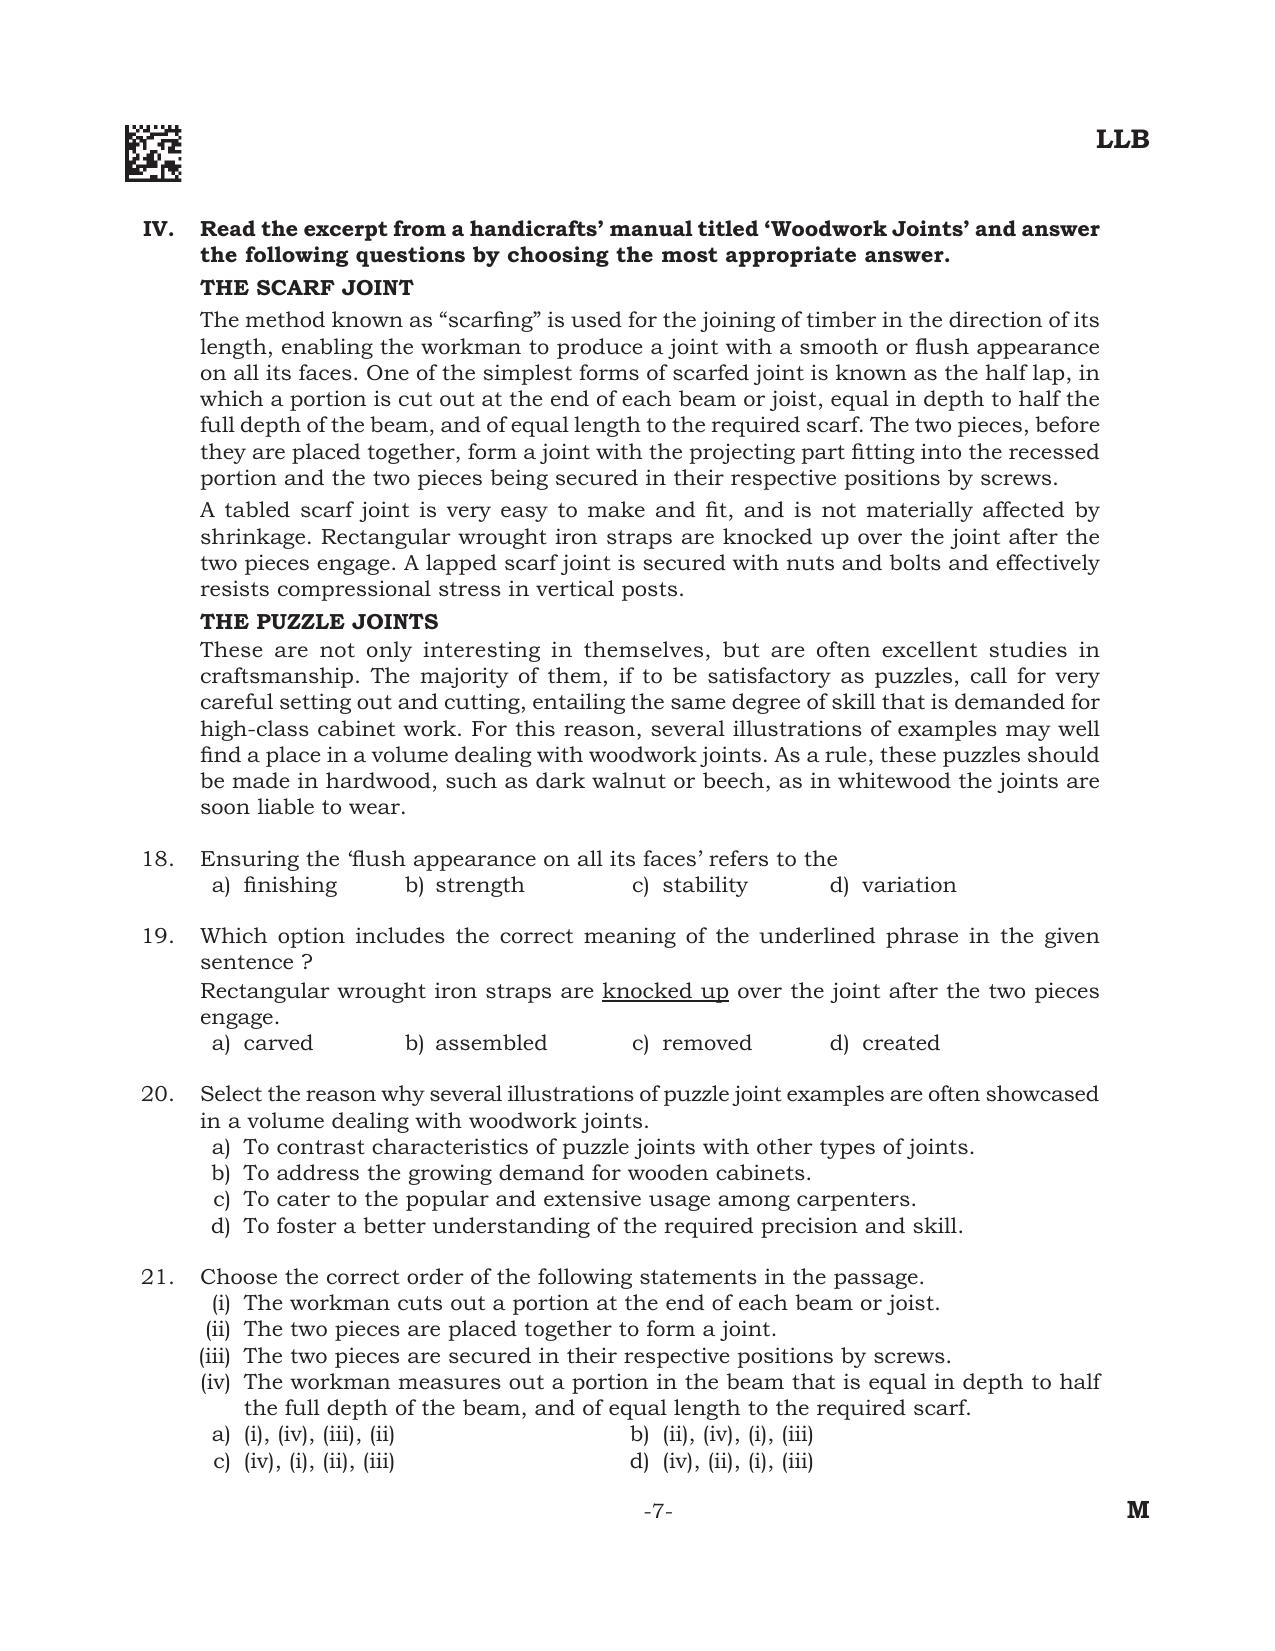 AILET 2022 Question Paper for BA LLB - Page 7